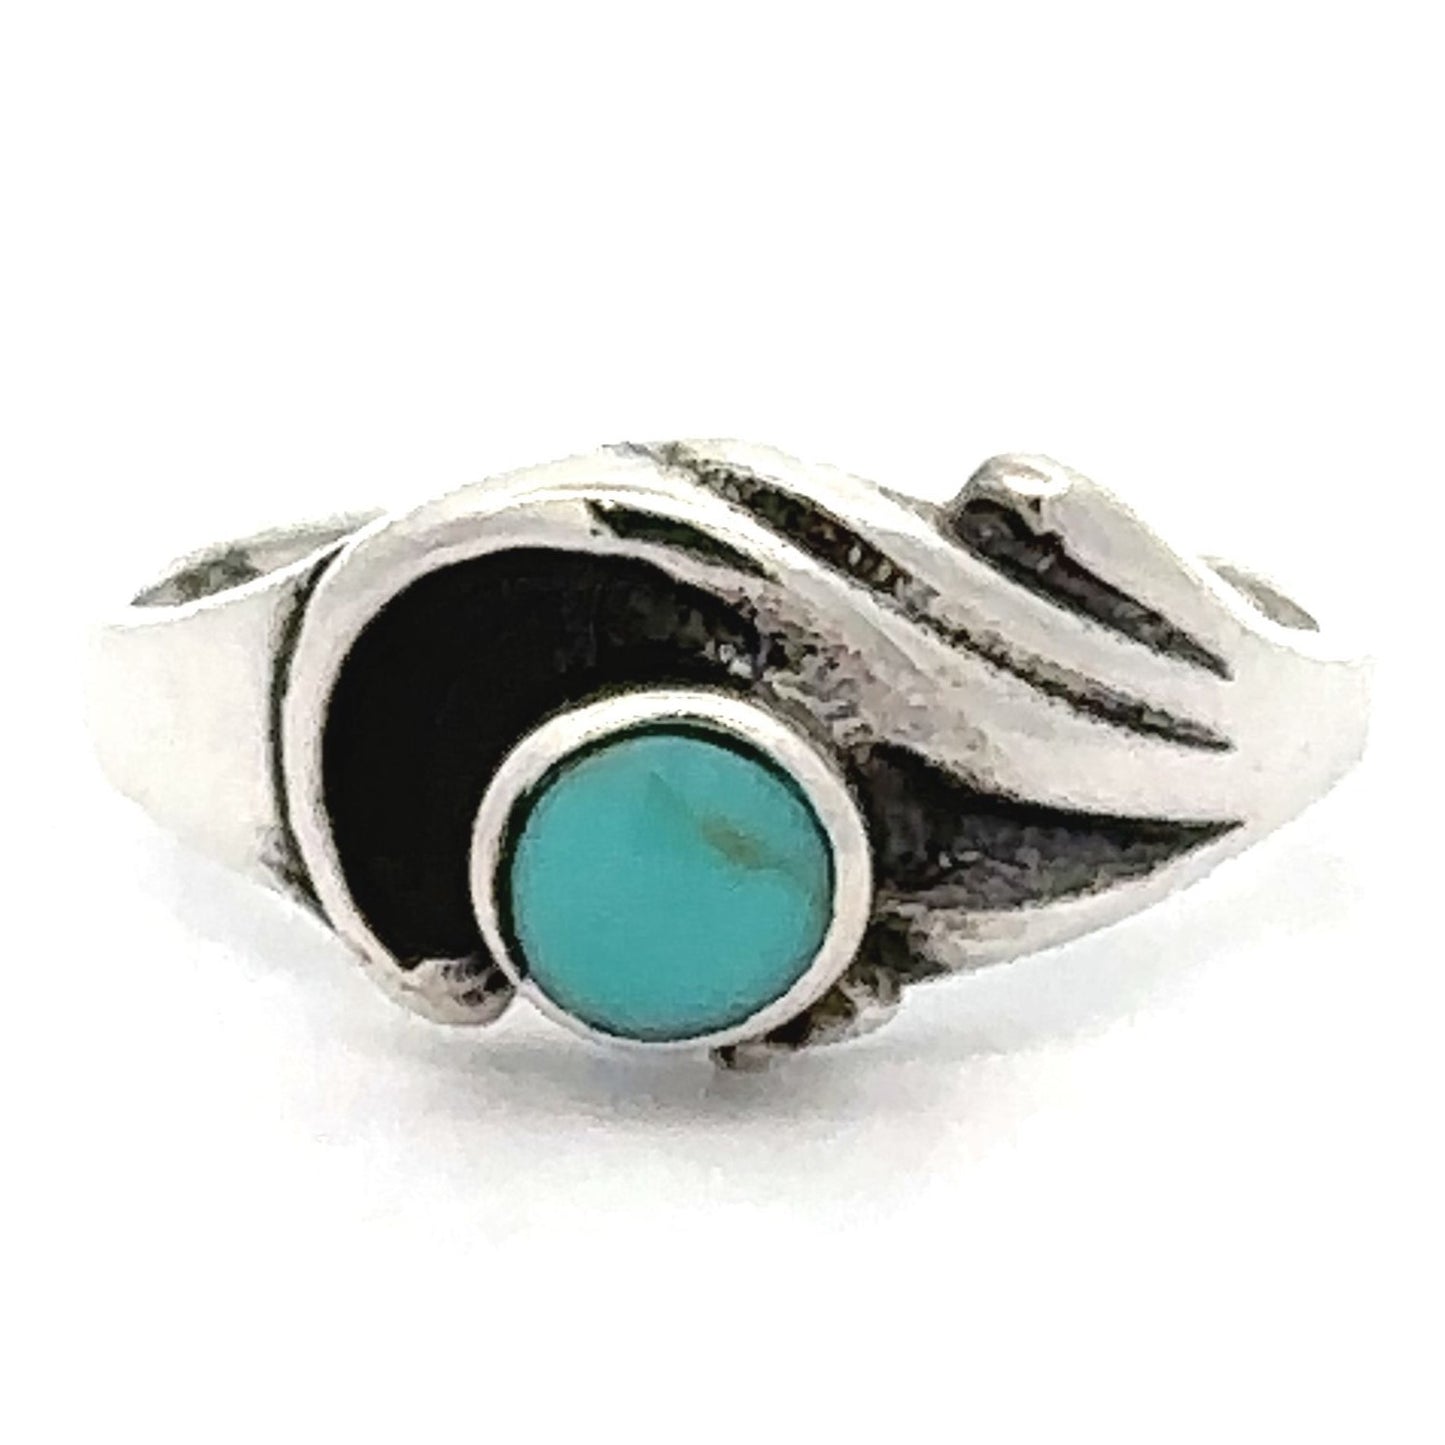 A silver ring with a Turquoise Inlay Ring with Swirling Detail.